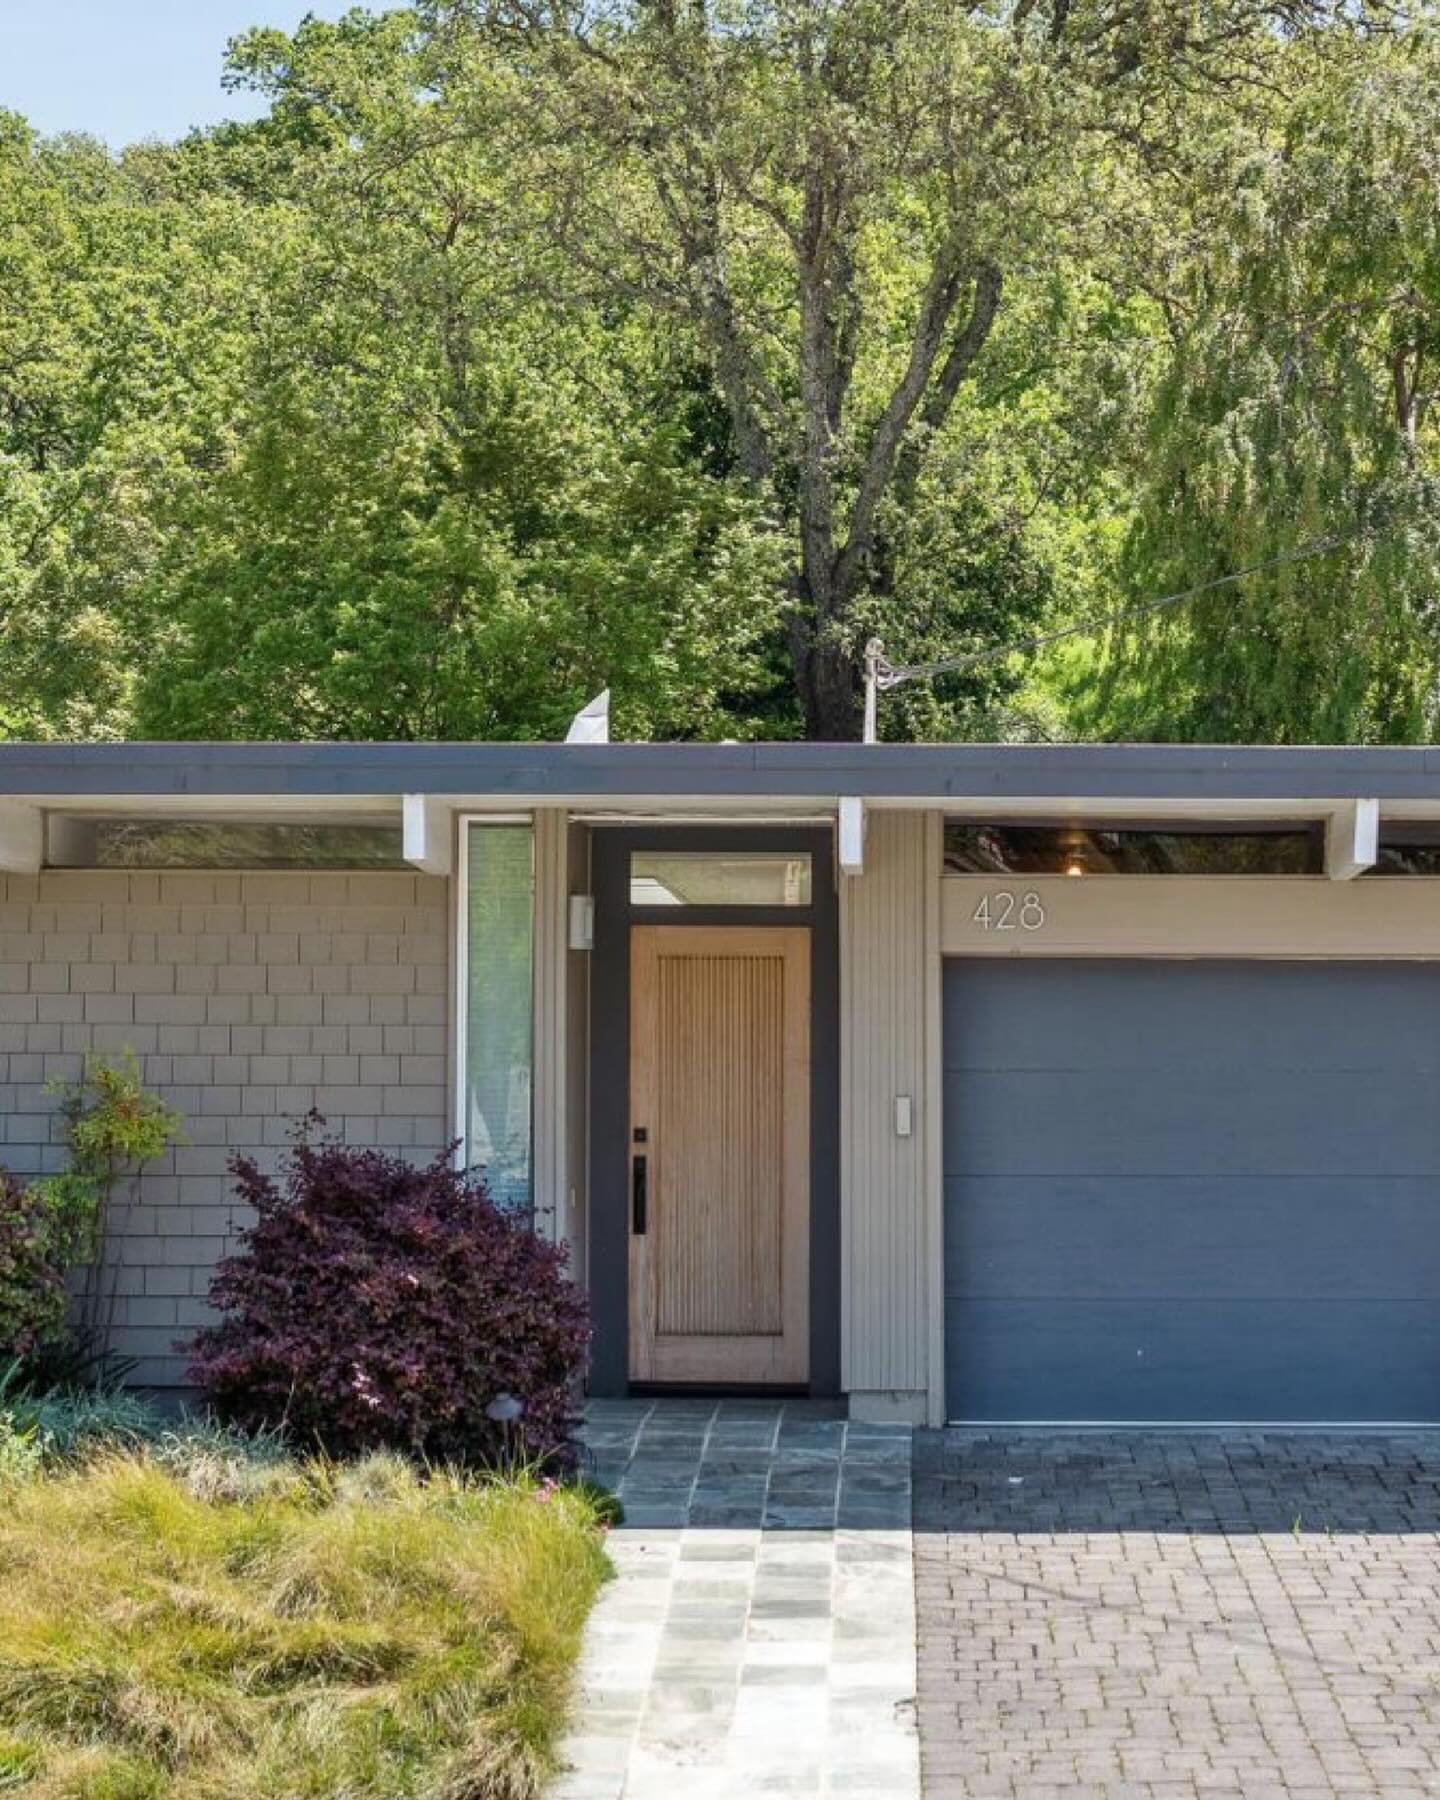 New listing! Experience the quintessential Eichler lifestyle with modern amenities and timeless design elements at 428 Nova Albion in San Rafael. 

This beautifully remodeled, single-level home boasts 4 bedrooms, 2 bathrooms, and a spacious 1,835 sqf